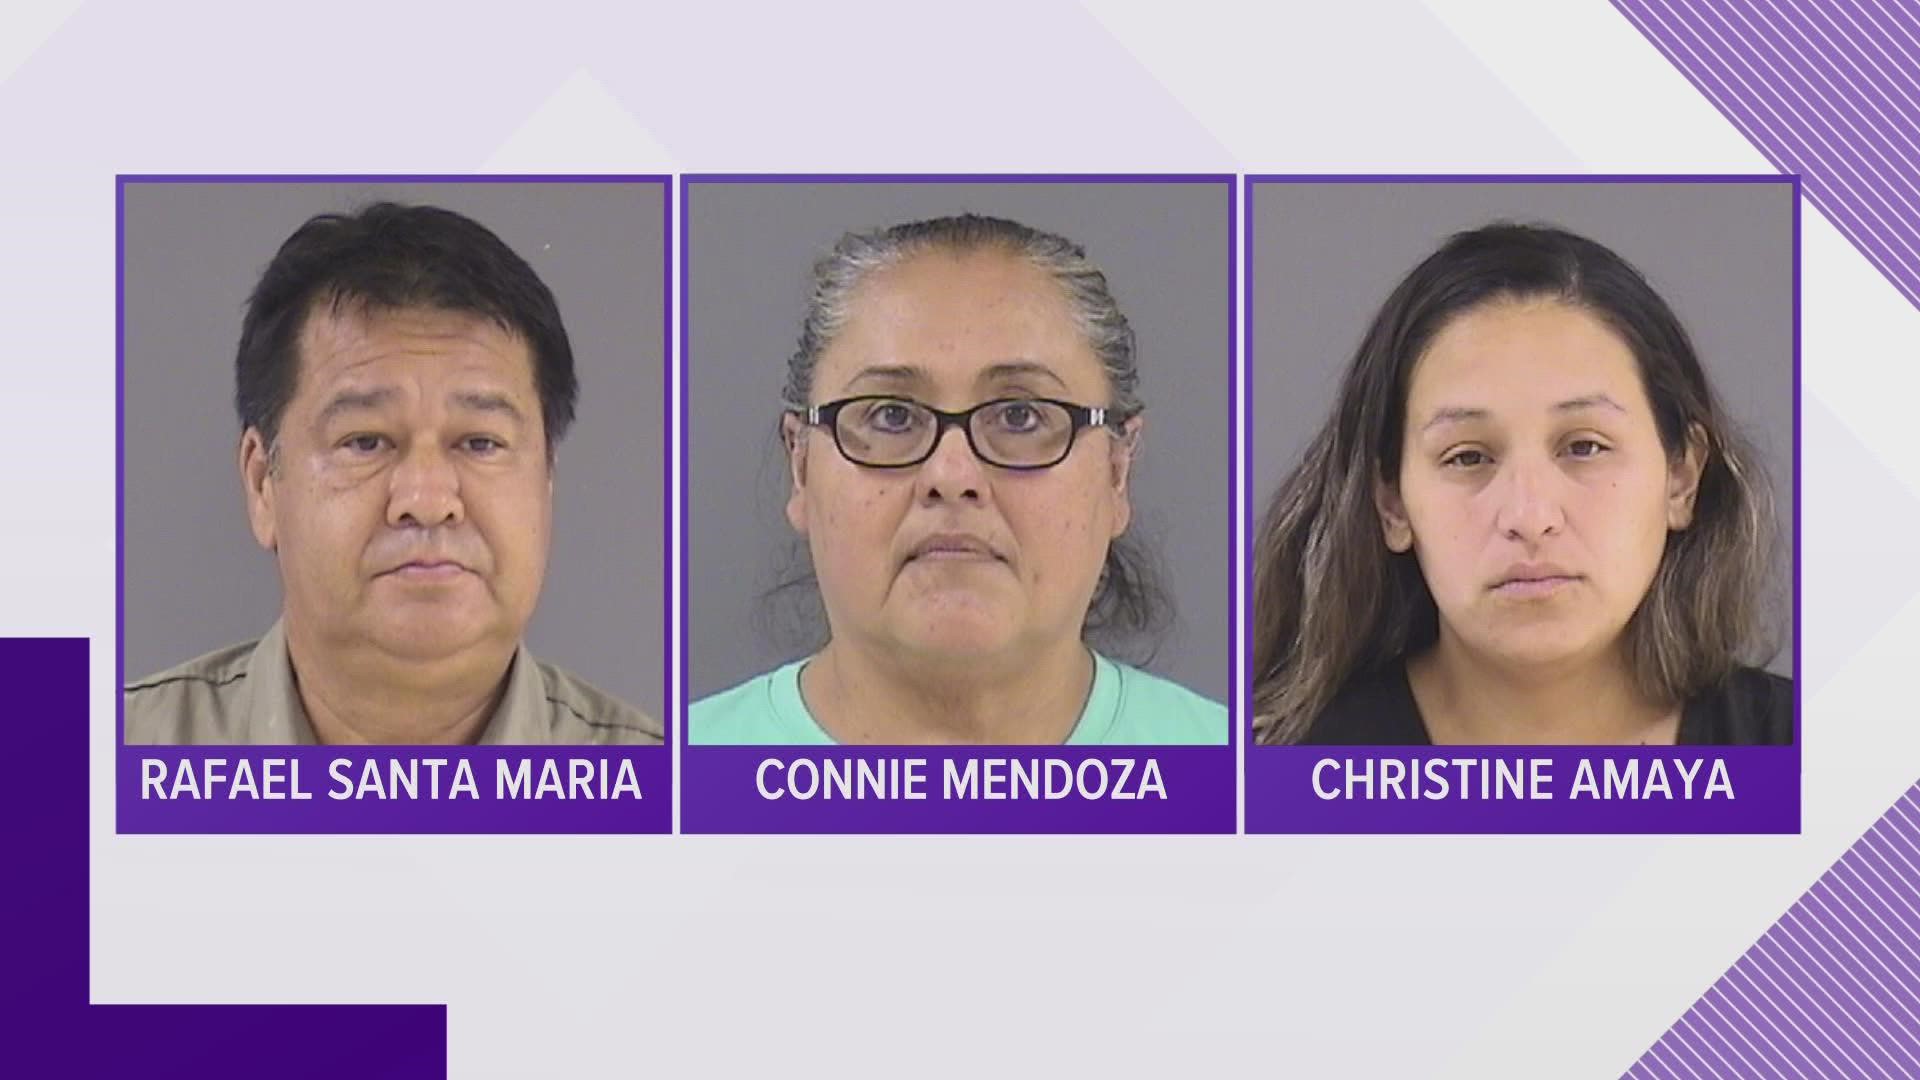 A fourth person has been arrested in connection with an alleged sexual assault at a day care in Lockhart.